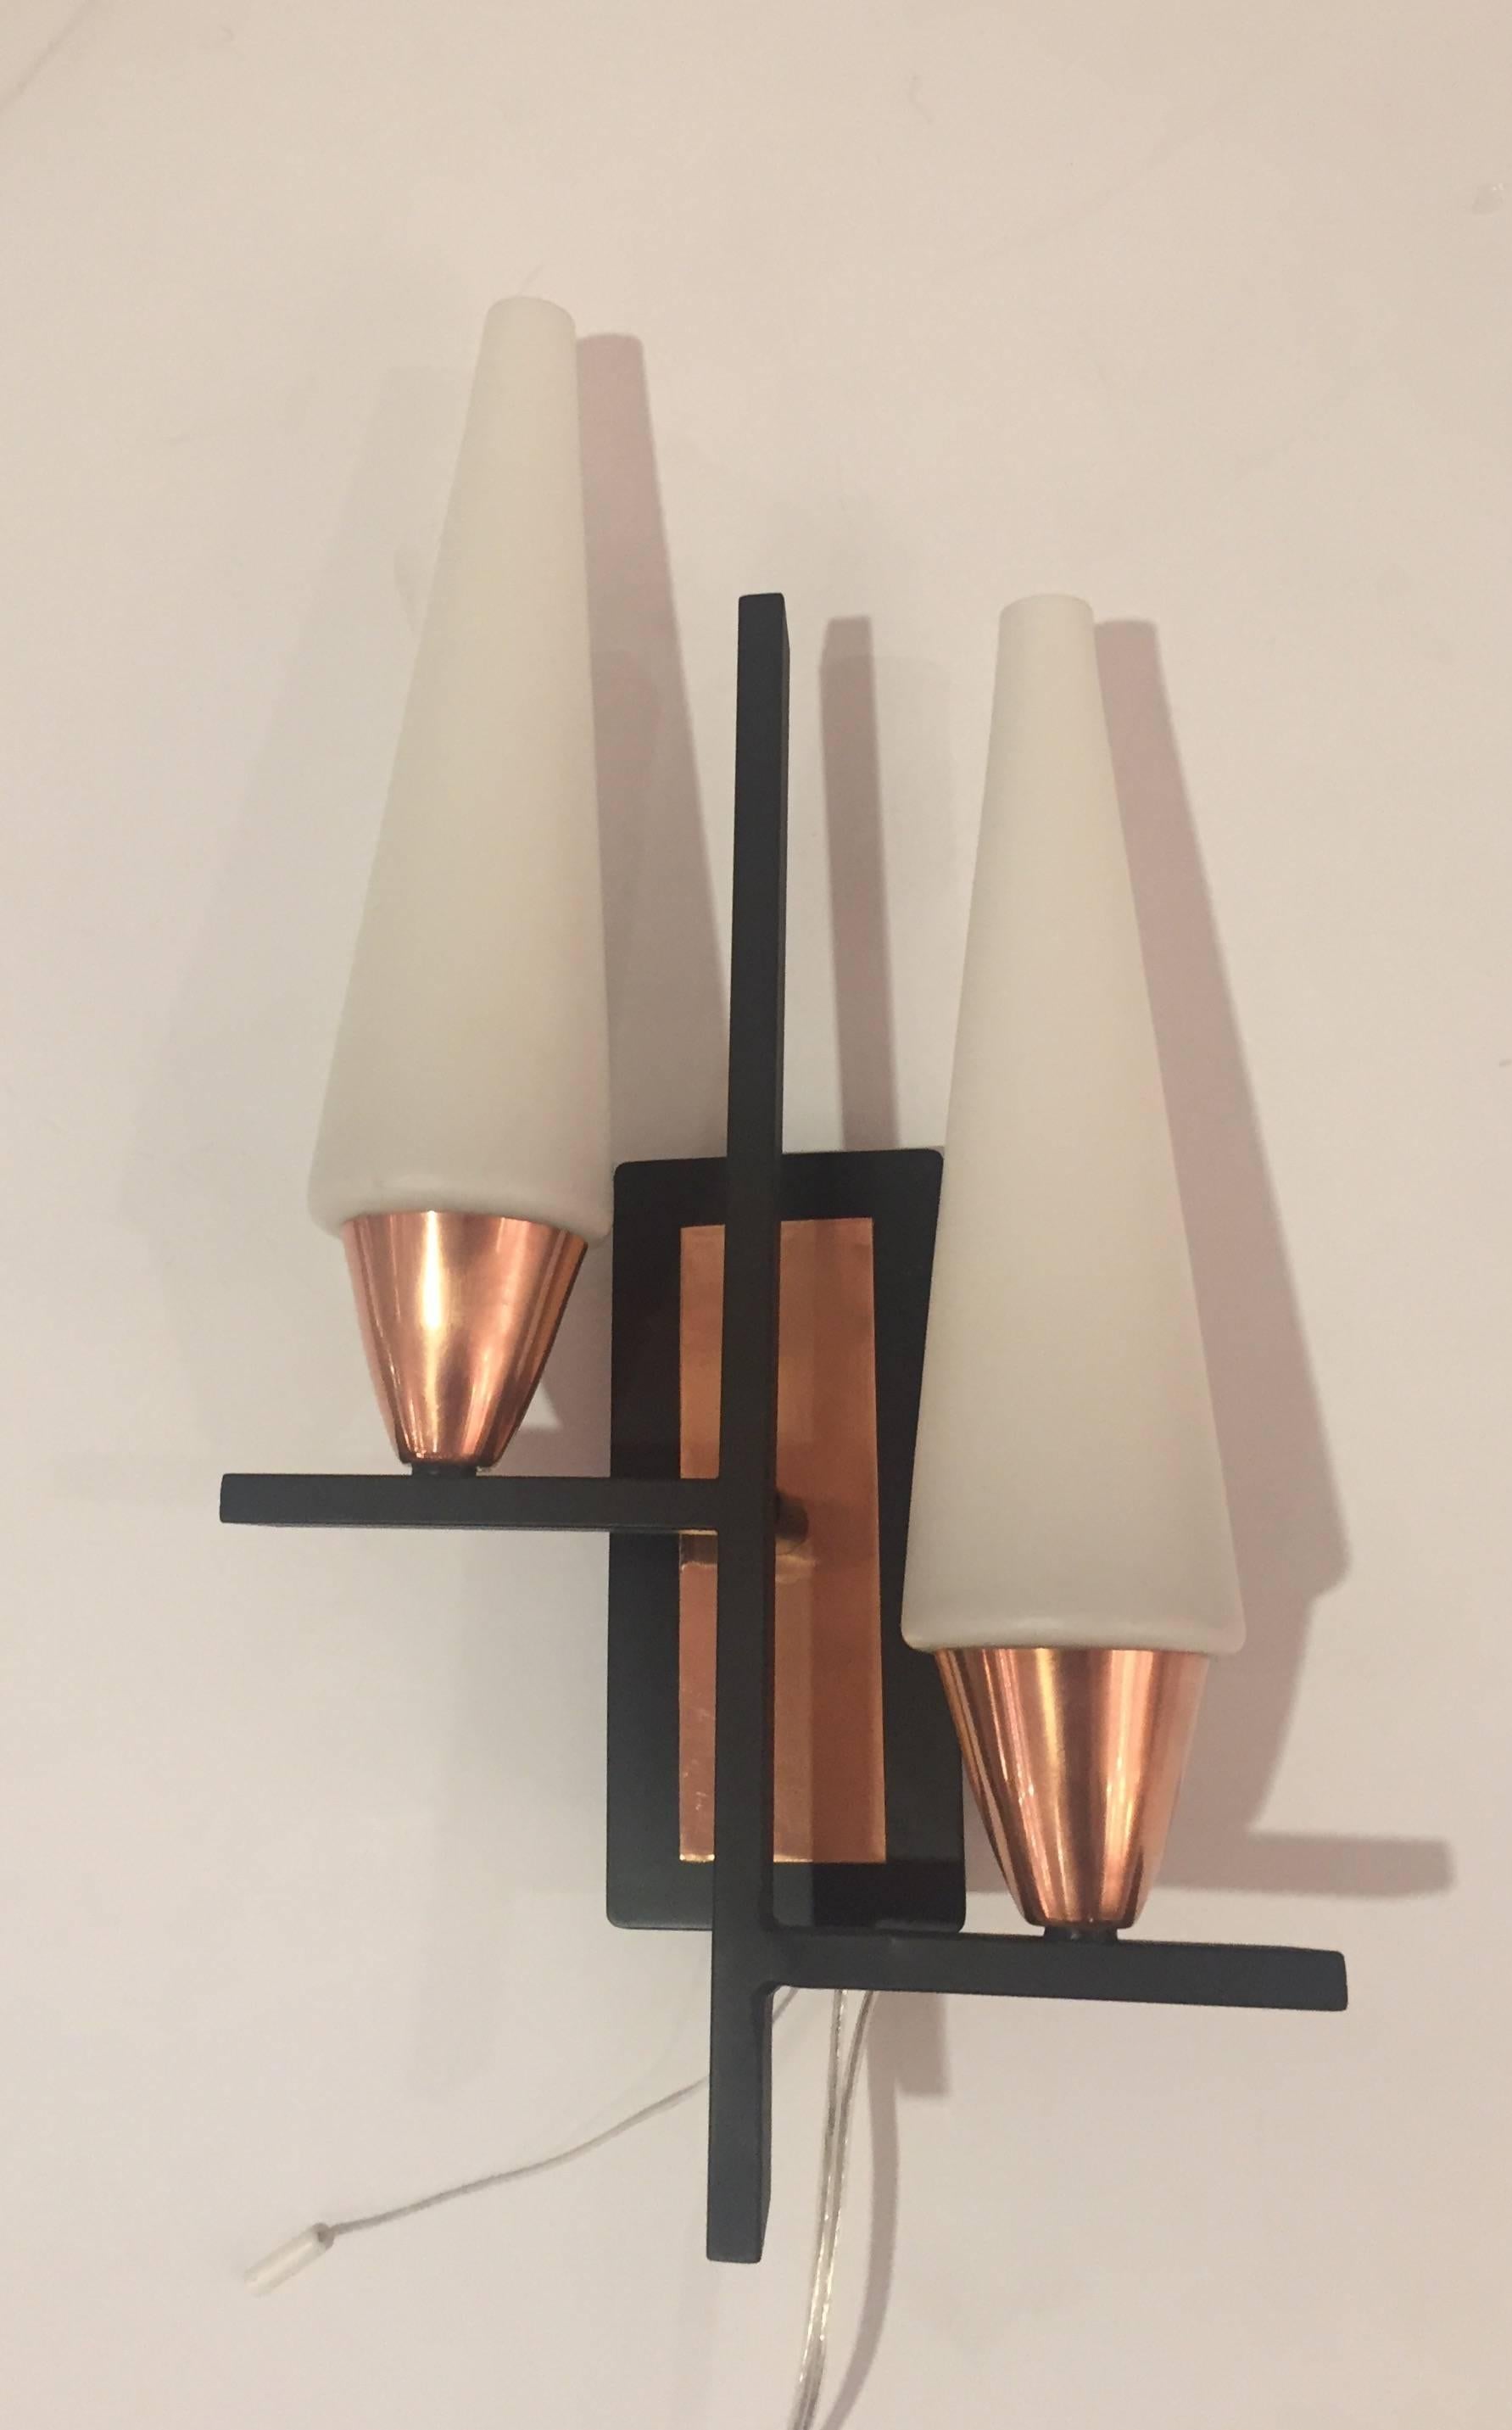 Two geometrically inspired wall sconces with copper accents and opaline glass diffusers. Each light has two European based sockets (adapters to American bulbs are provided). They also have a switch wire on each wall support. The back plates have